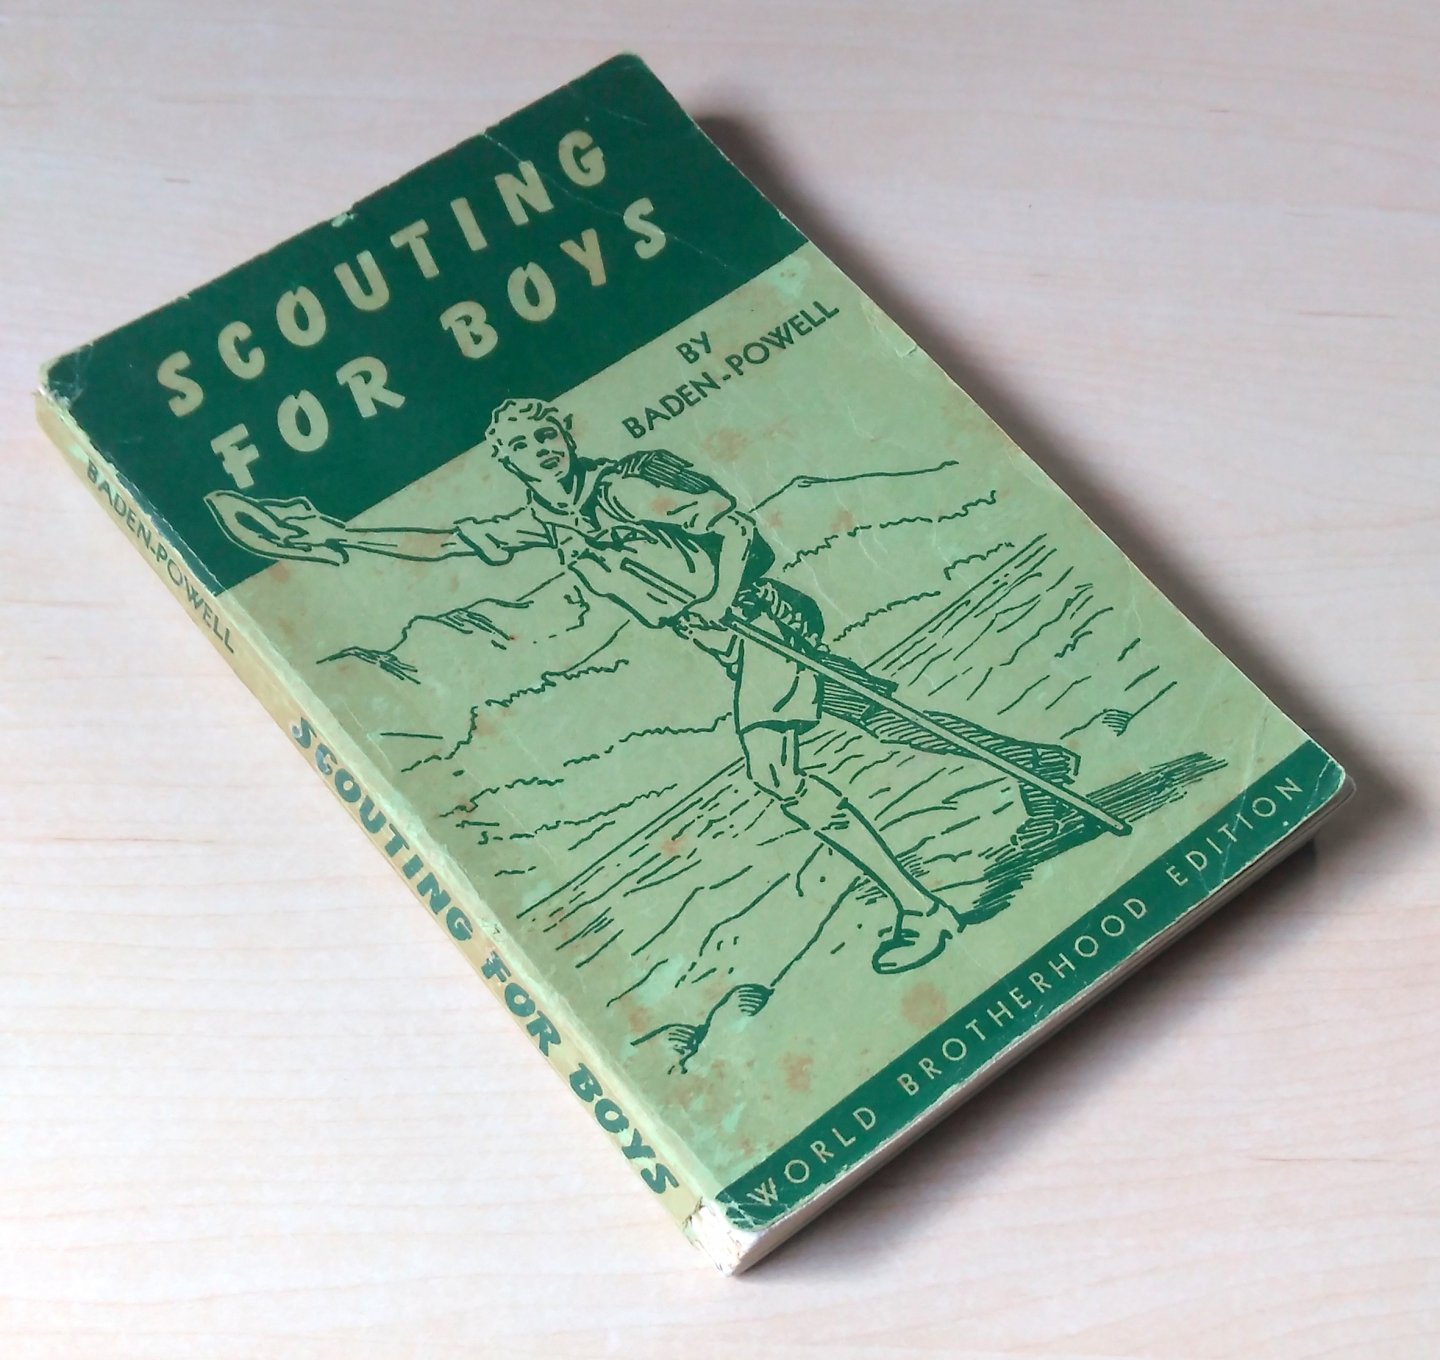 Lord Baden-Powell of Gilwell - Scouting for boys - A Handbook for Instruction in Good Citizenship Through Woodcraft